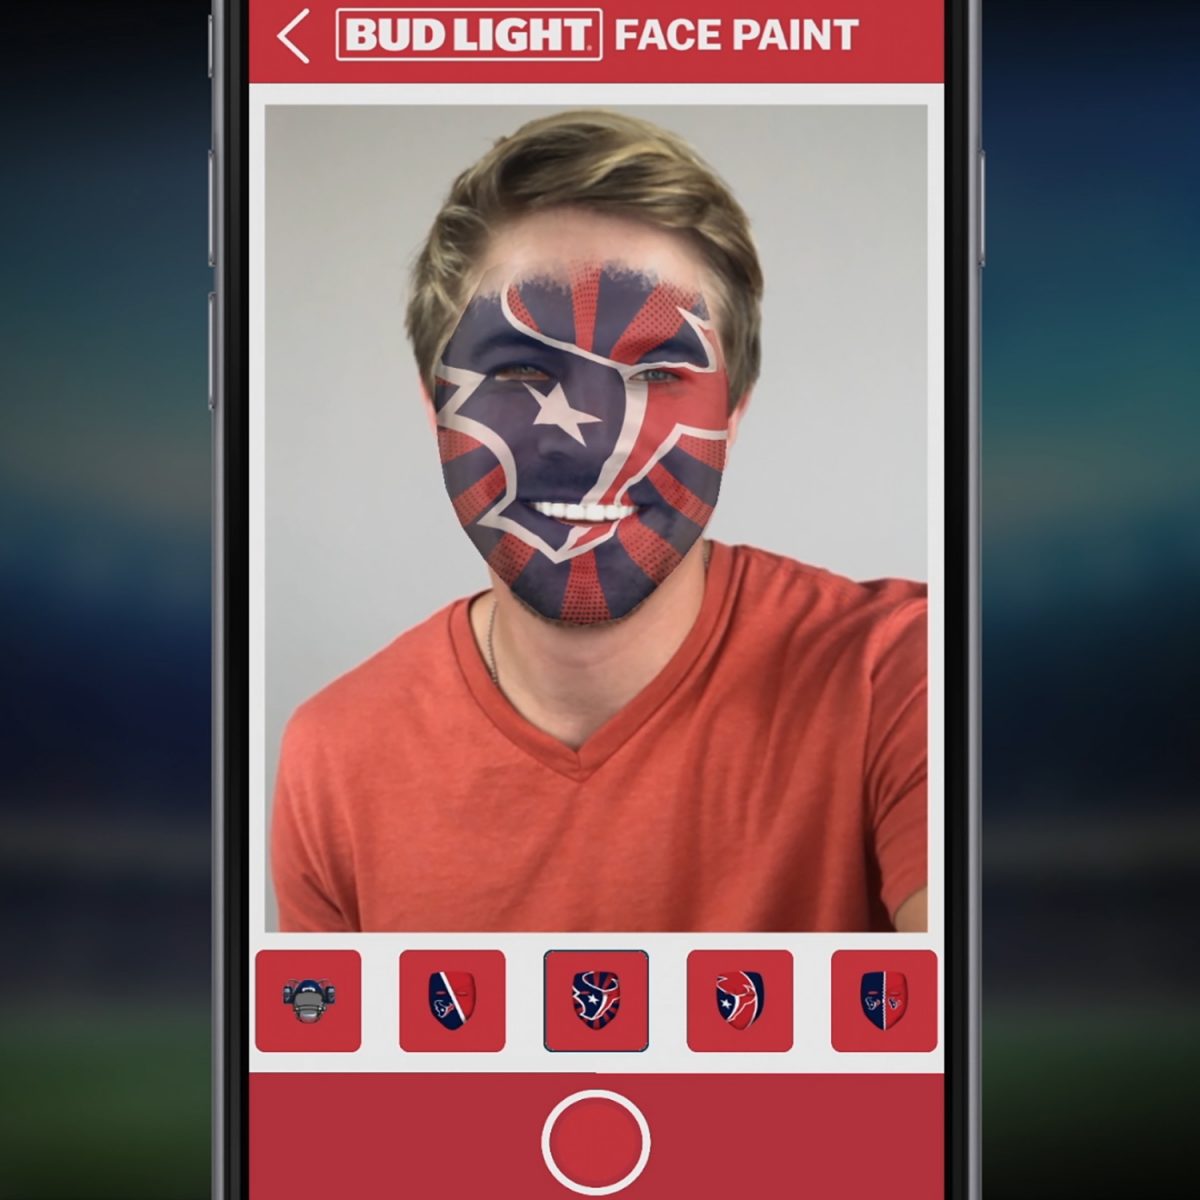 Tech Trends Augmented Reality NFL Mobile App Bud Light Broncos